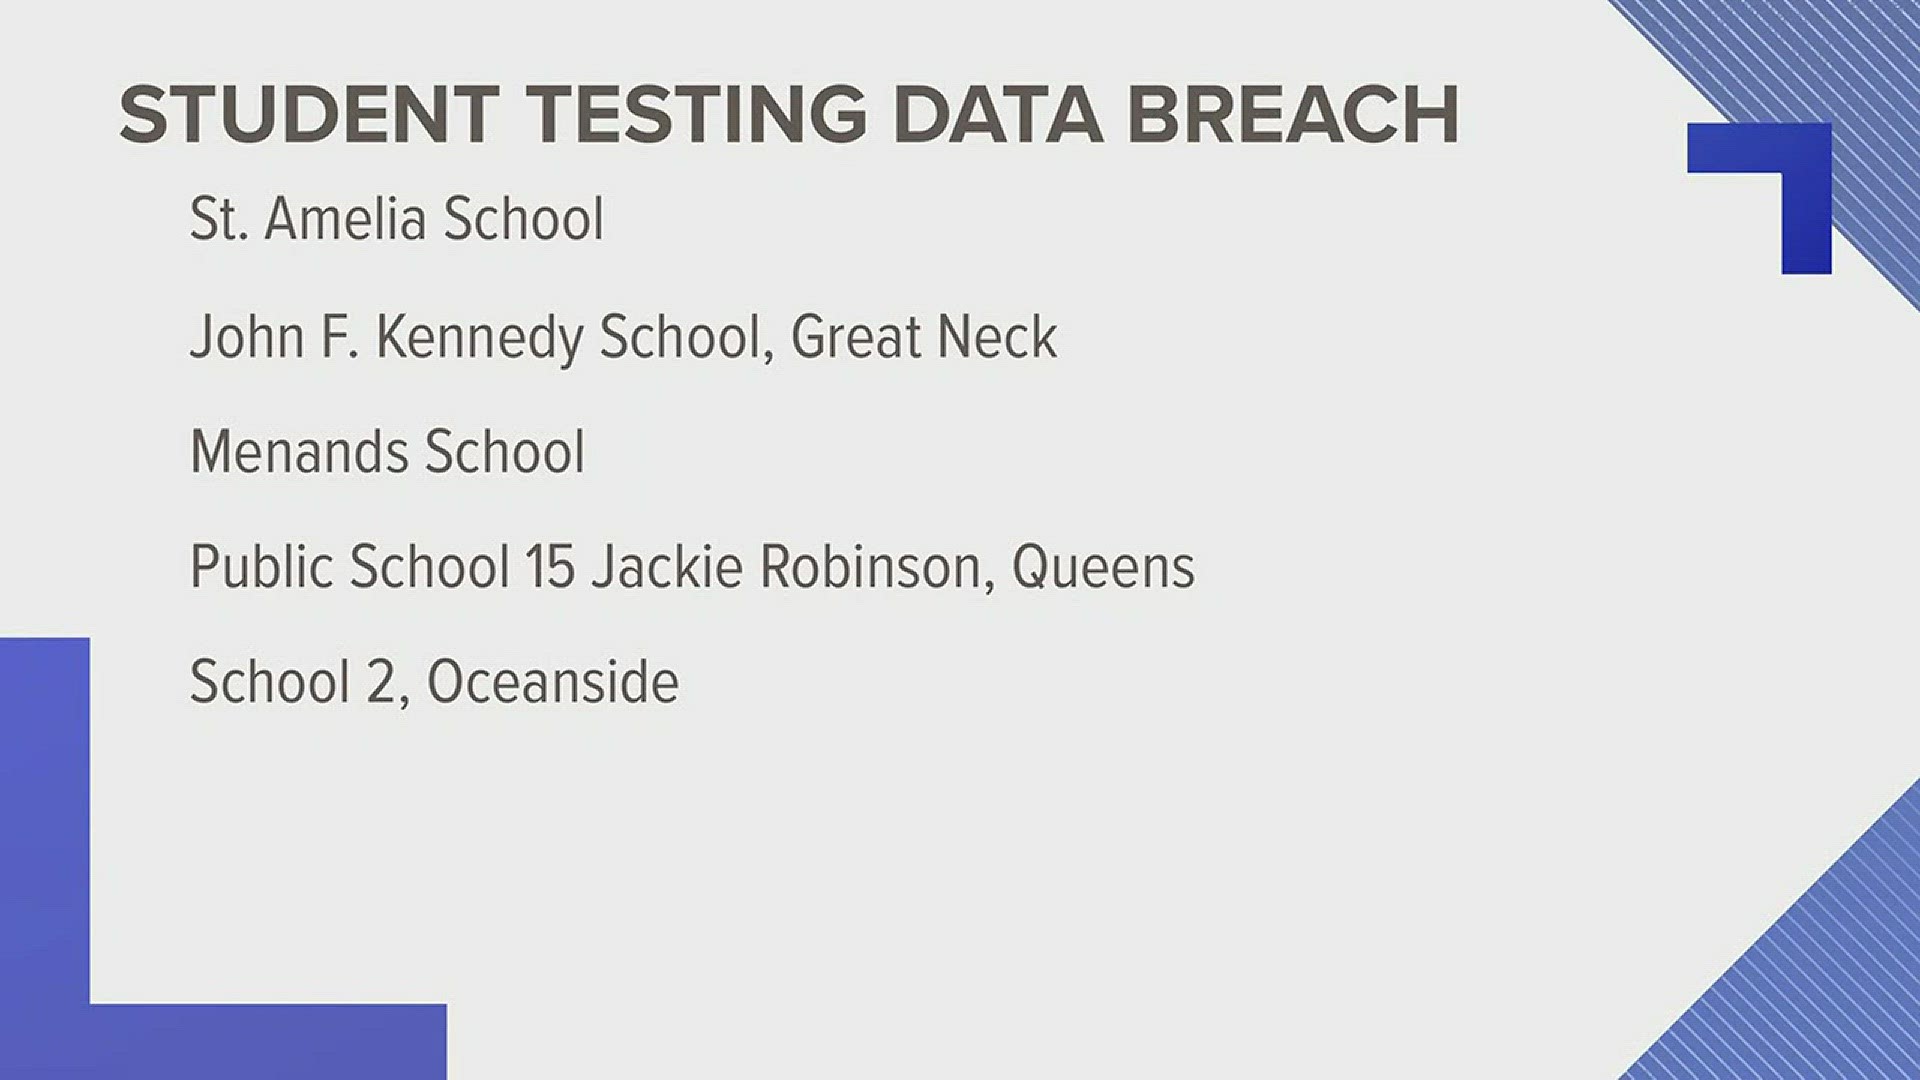 Test Data Breach Impacts 52 Students